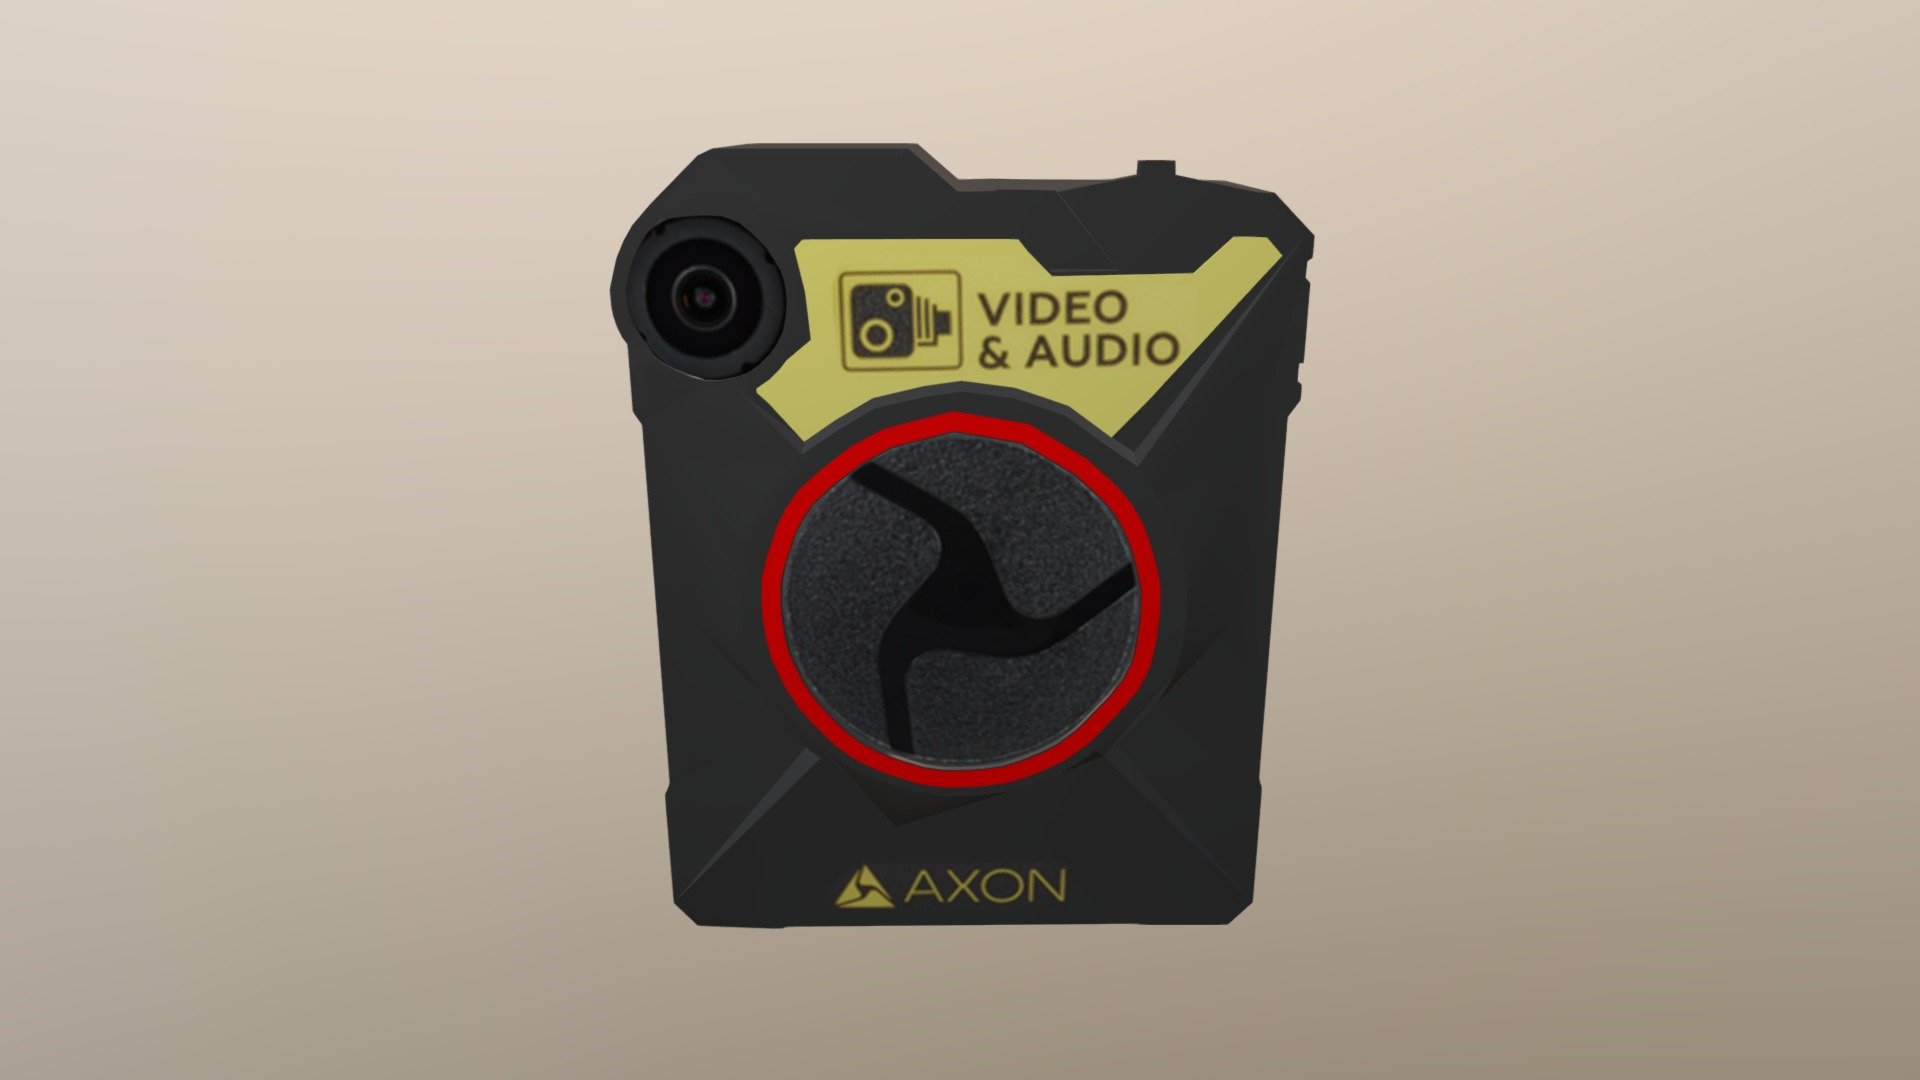 Simple body camera based off Axon's body camera, not the best but made to get used to blender 3d model